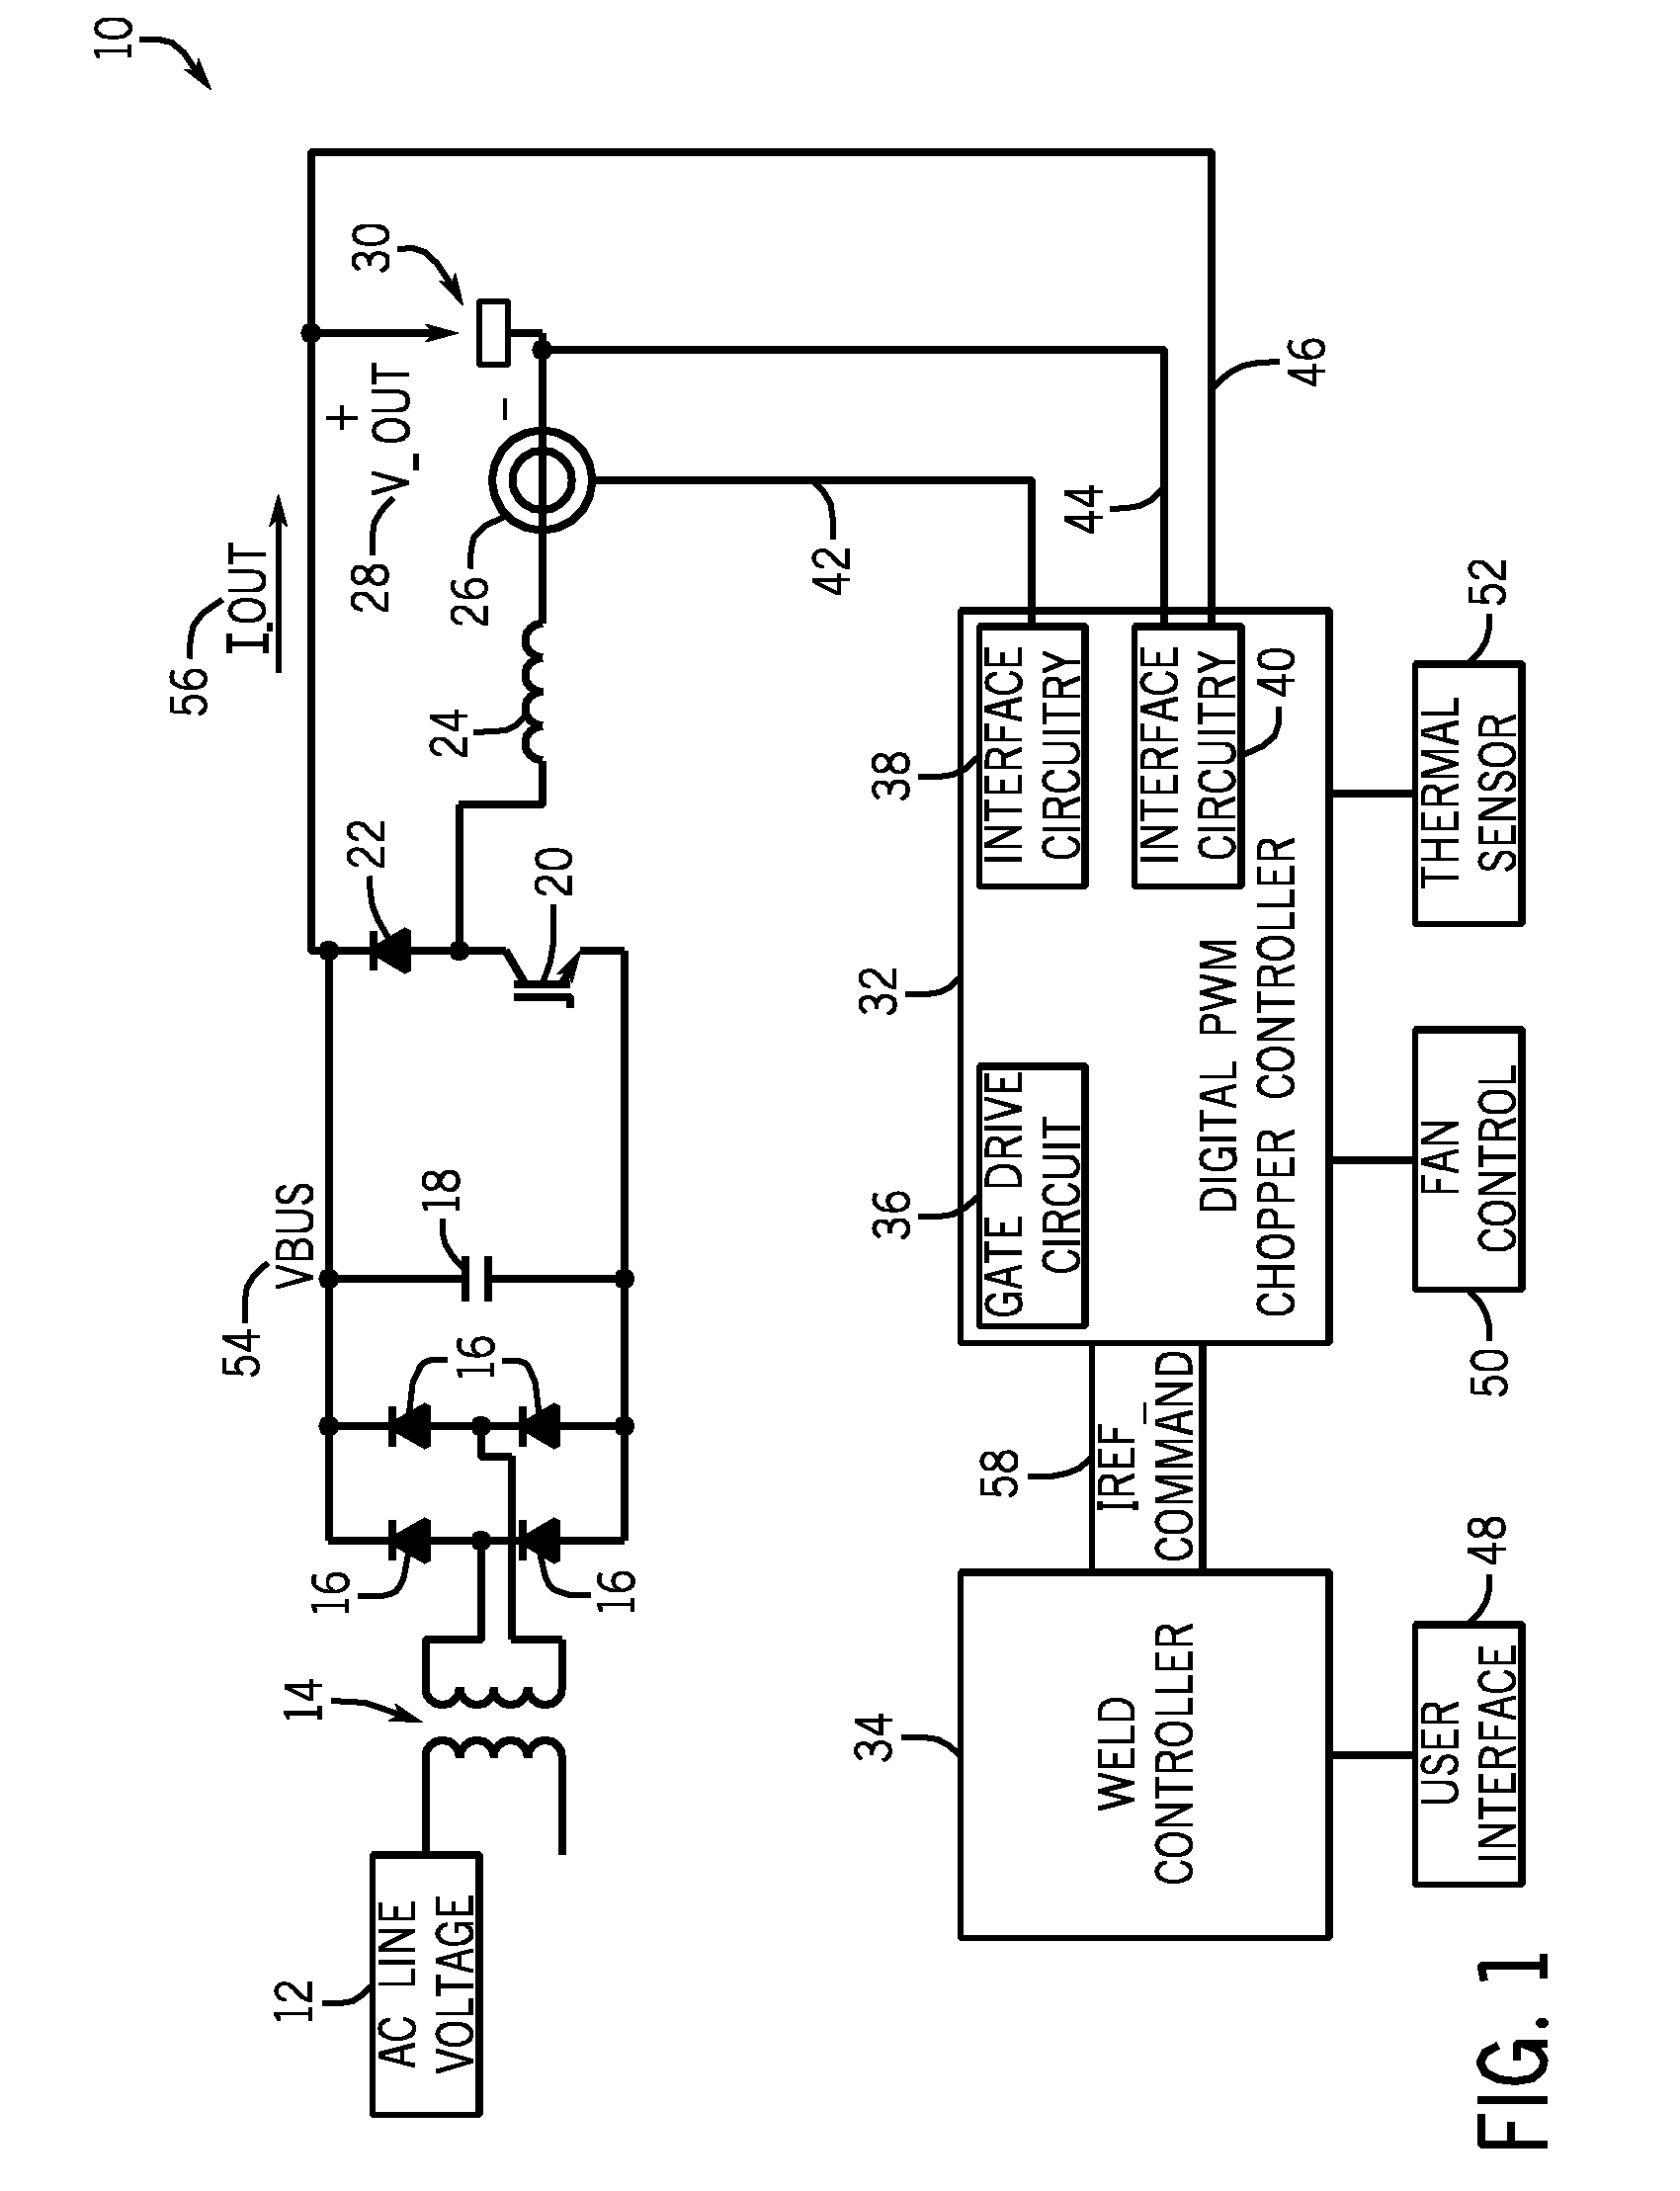 Systems and devices for determining weld cable inductance